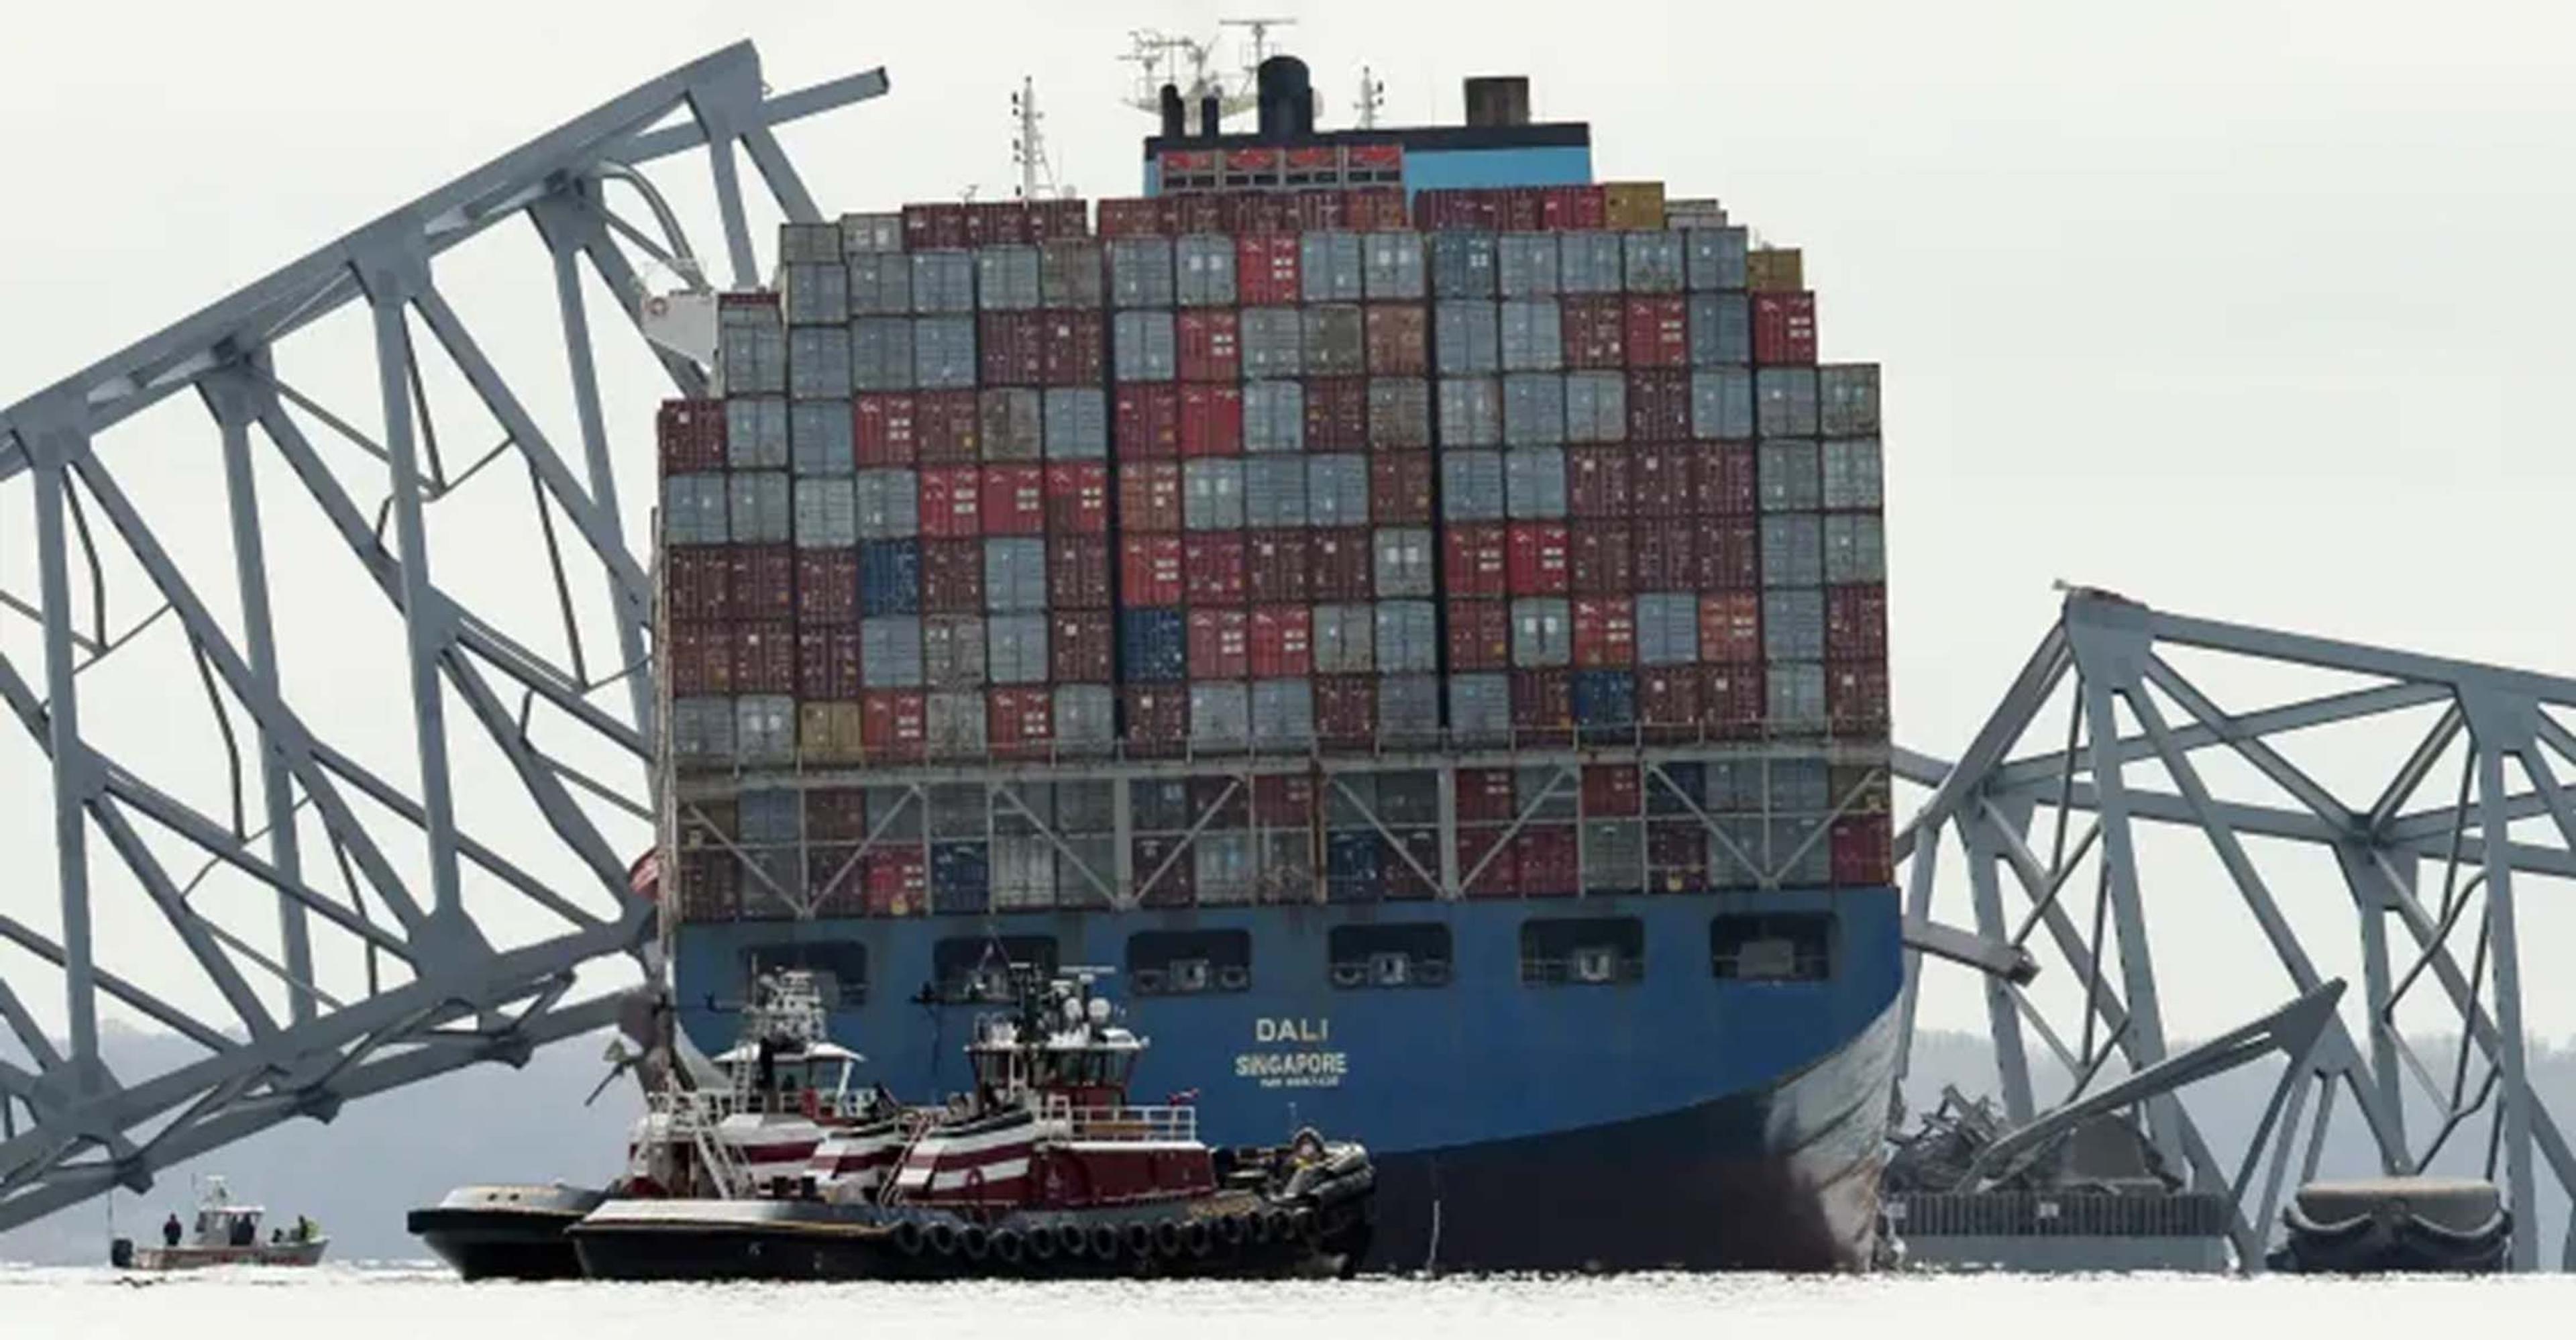 Baltimore port bridge collapsed on container ship